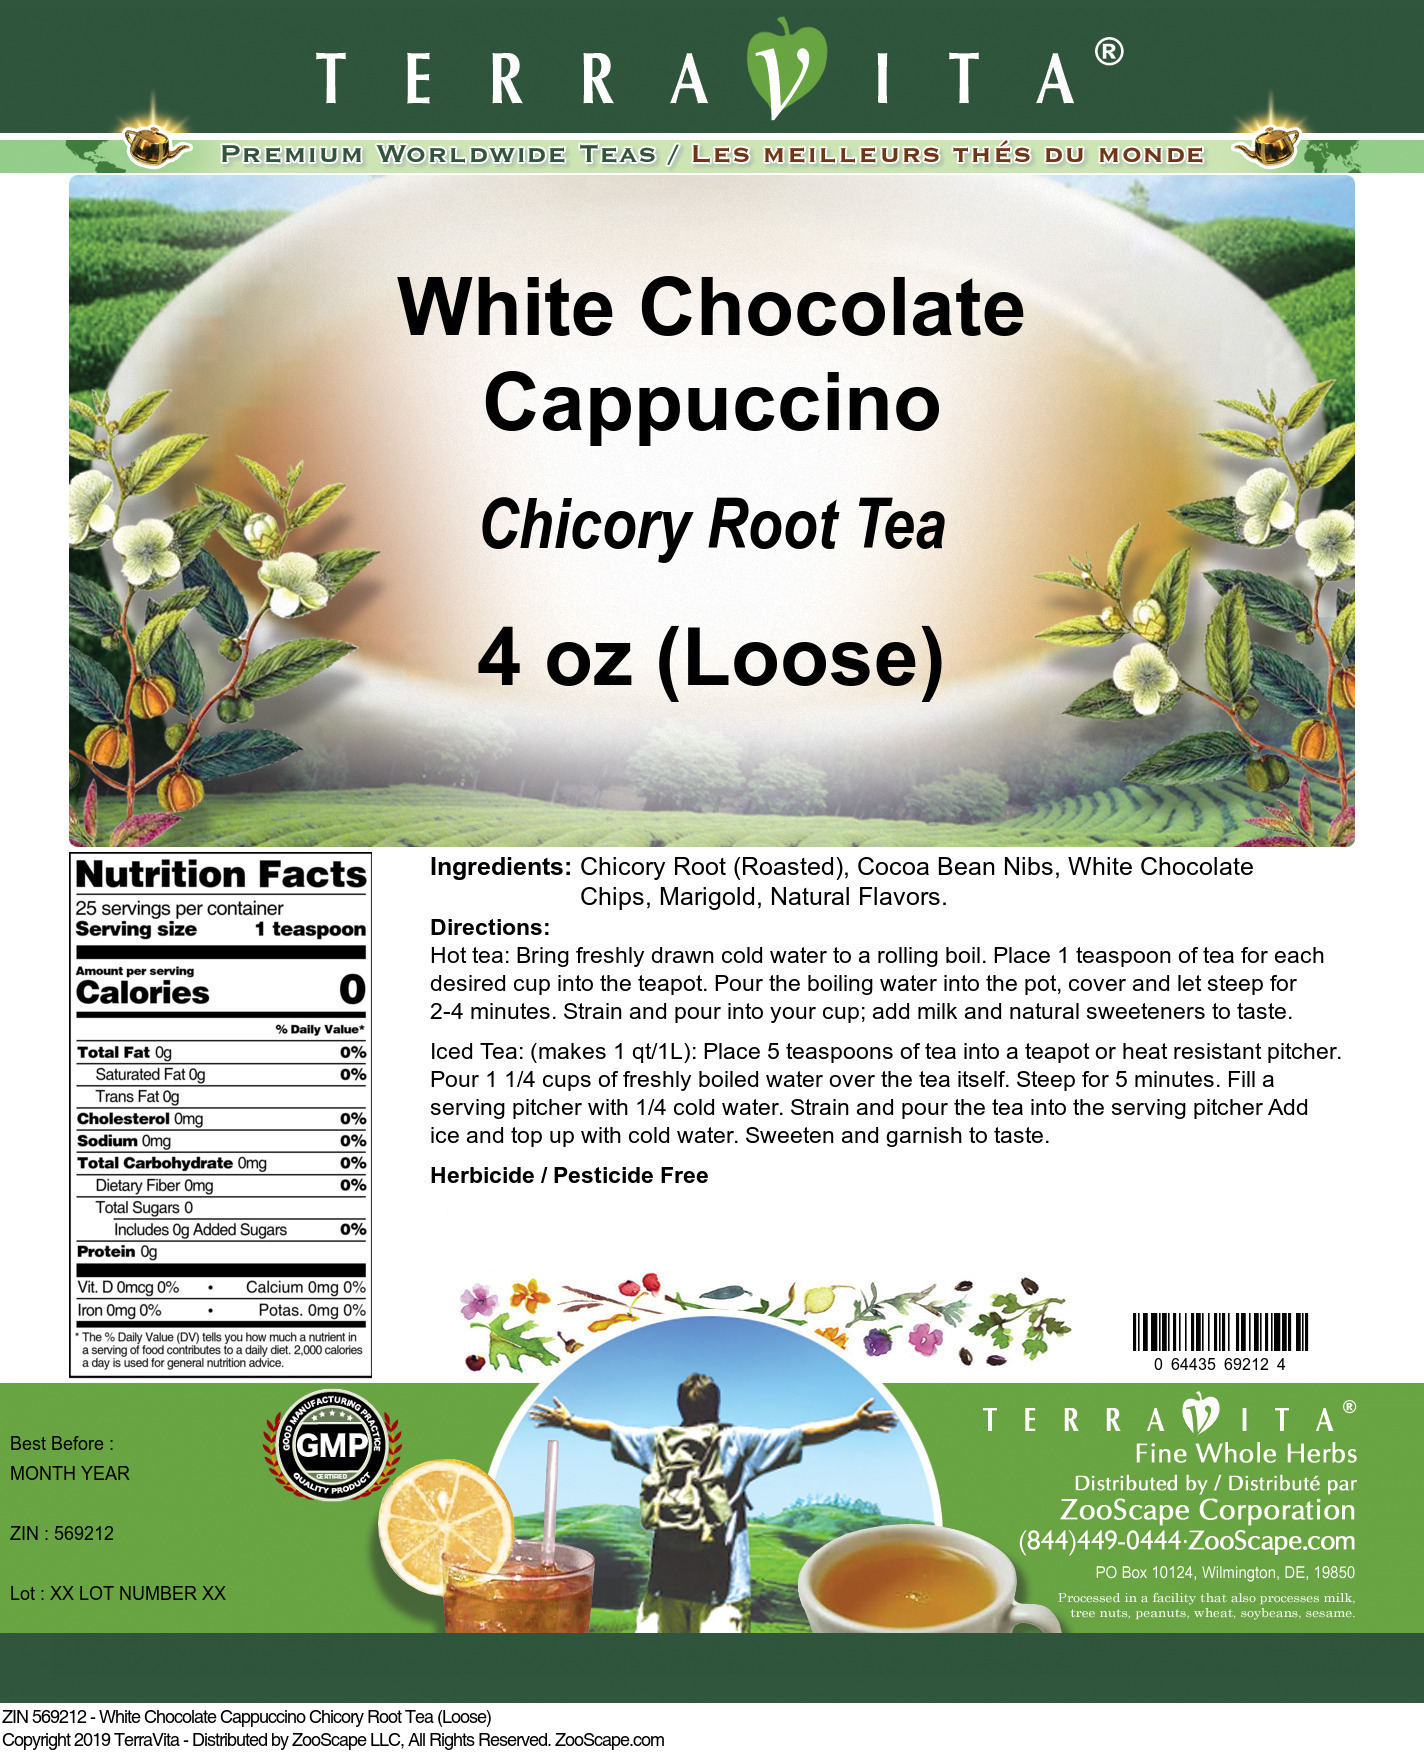 White Chocolate Cappuccino Chicory Root Tea (Loose) - Label